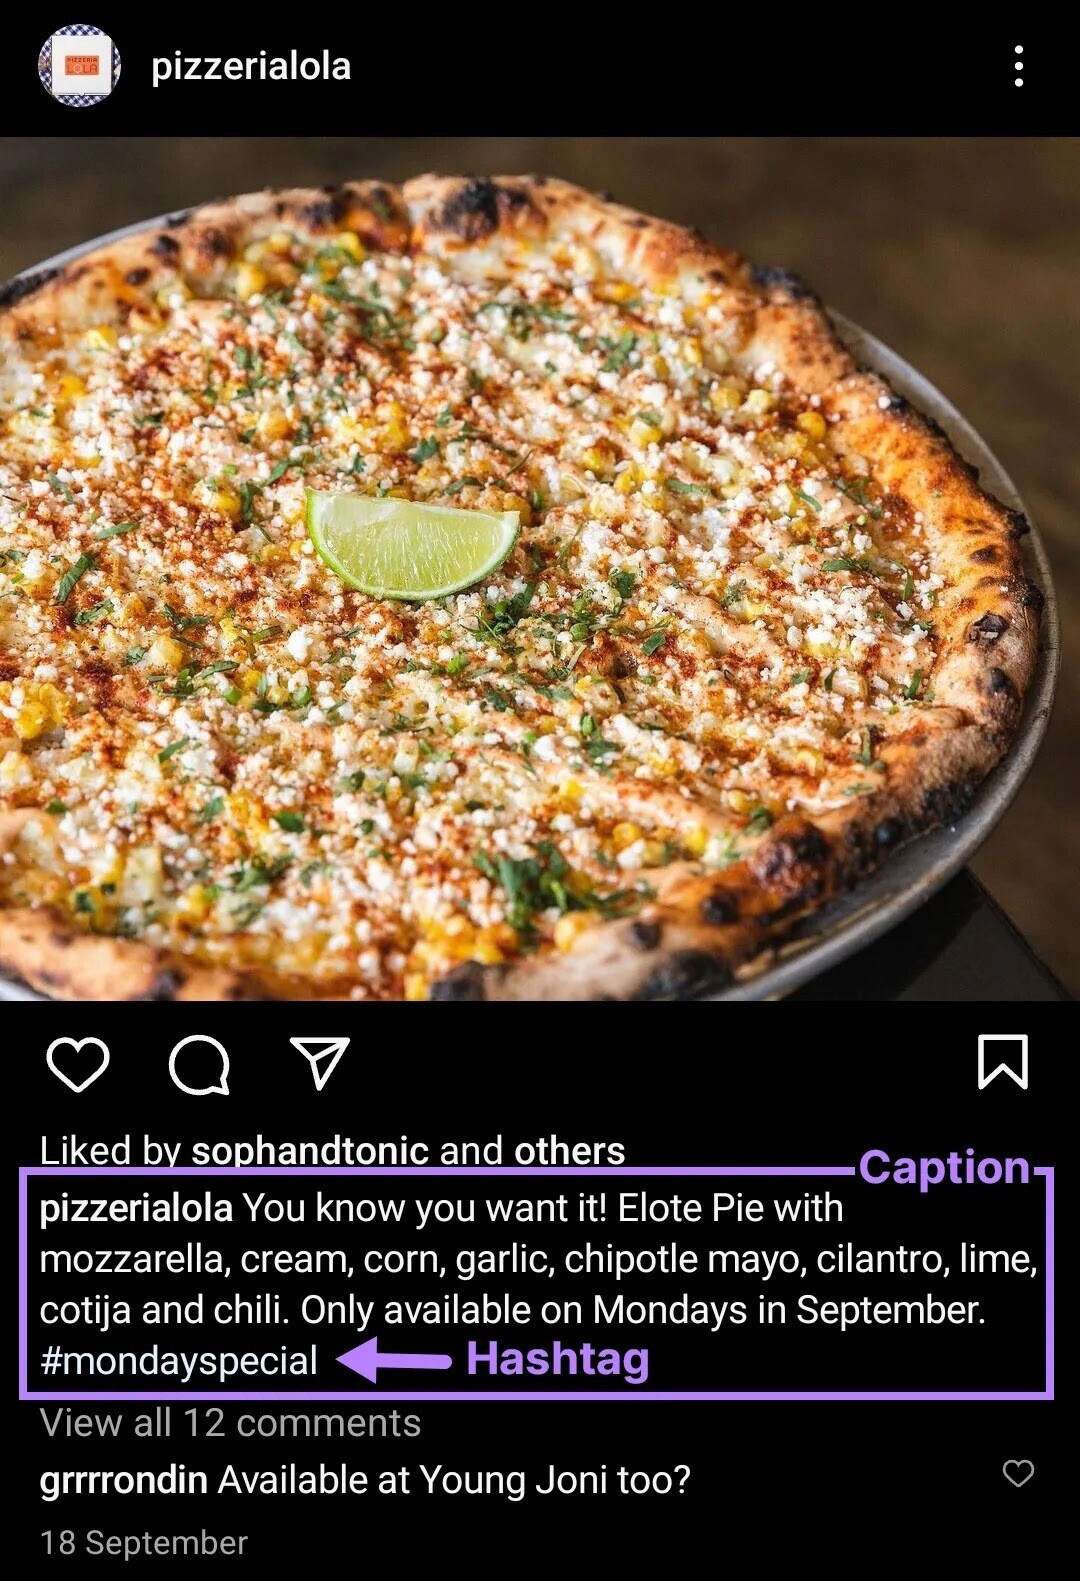 pizzerialola's Instagram post with caption and "#mondayspecial" hashtag